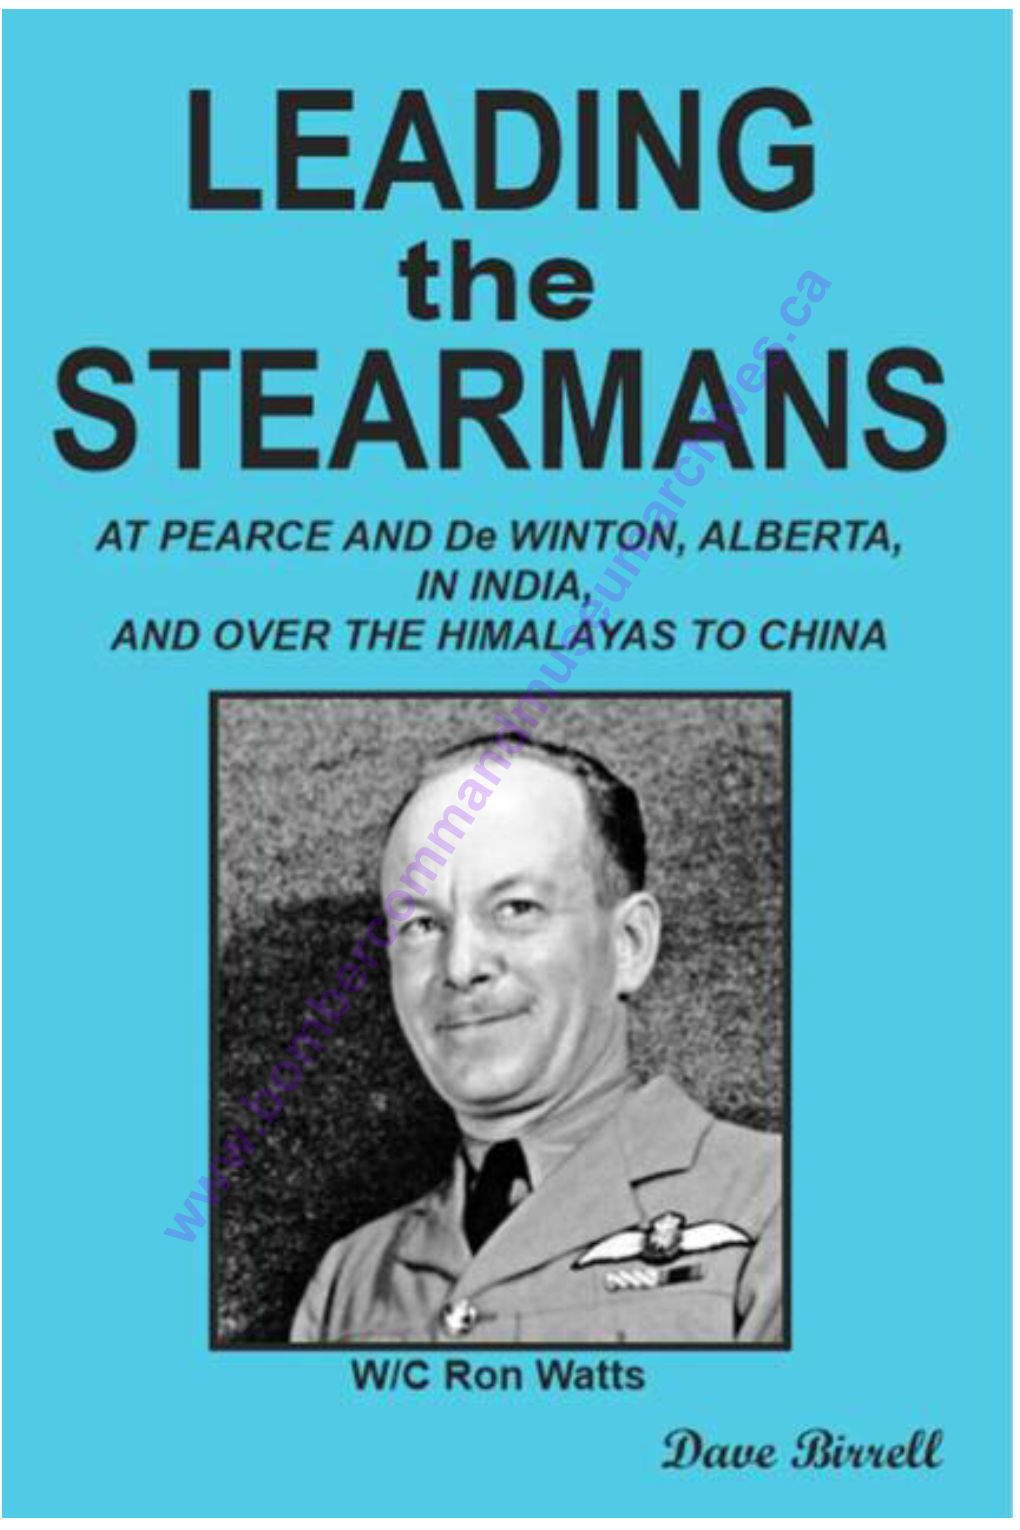 LEADING the STEARMANS at PEARCE and De WINTON, ALBERTA, in INDIA, and OVER the HIMALAYAS to CHINA